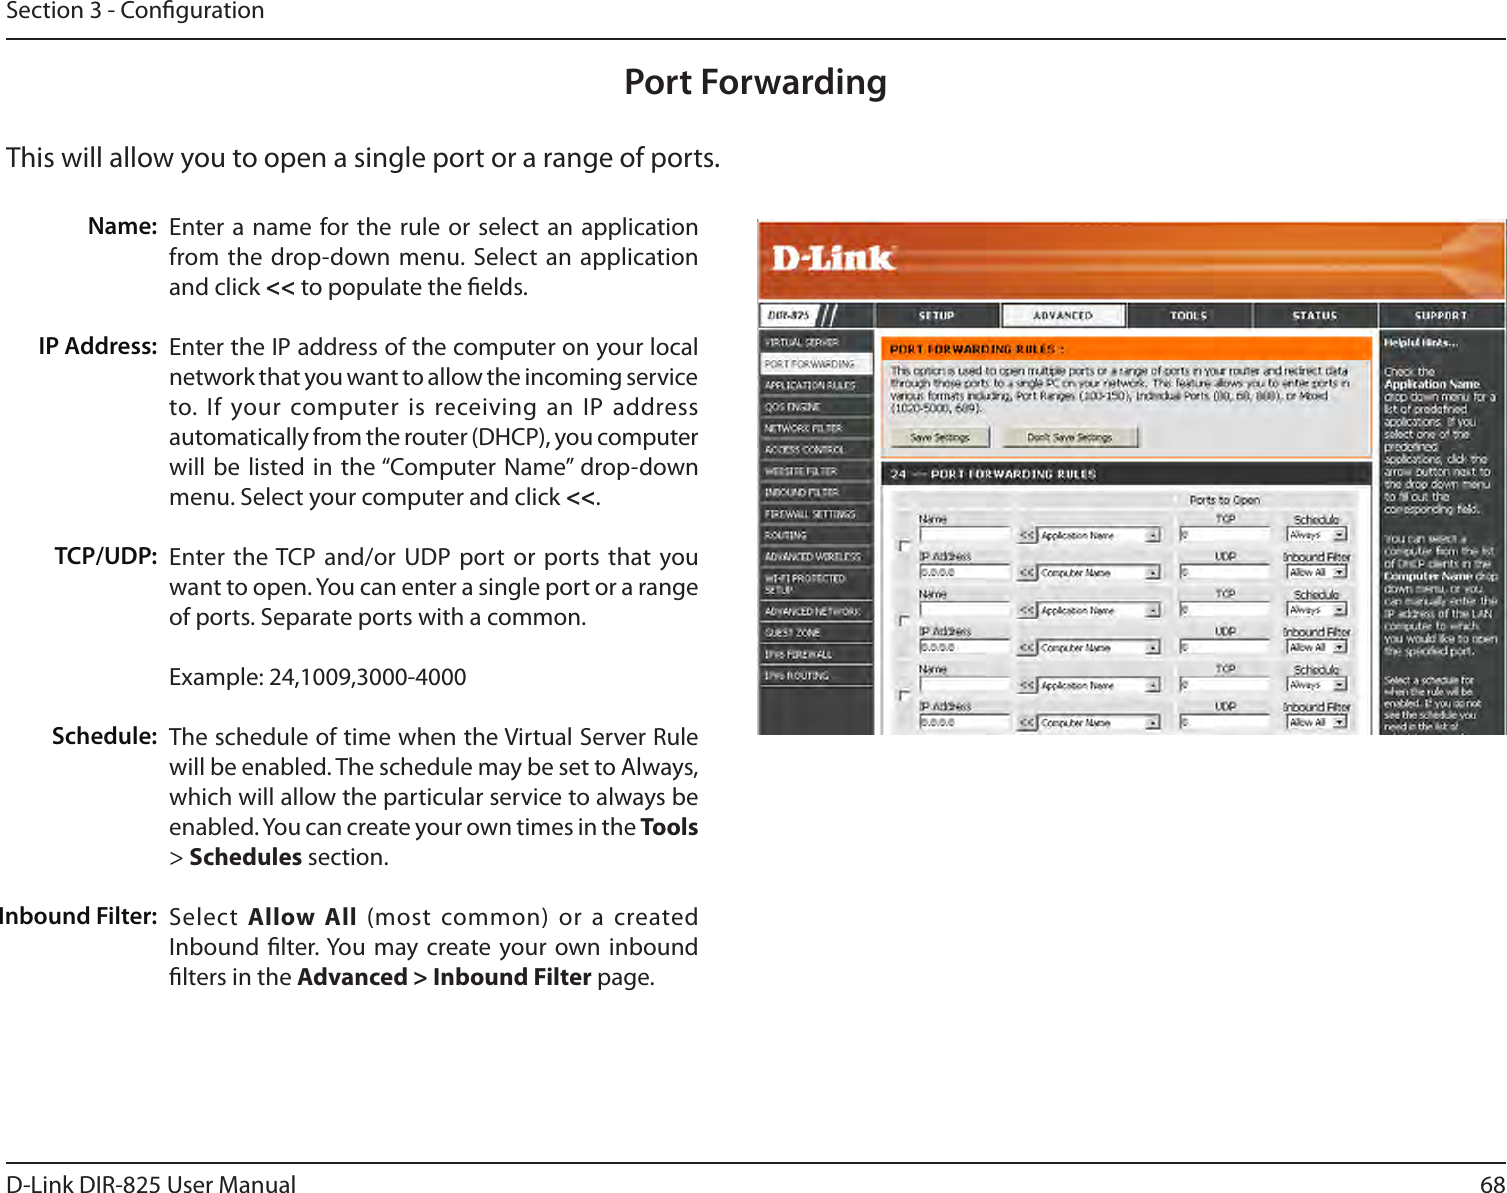 68D-Link DIR-825 User ManualSection 3 - CongurationThis will allow you to open a single port or a range of ports.Port ForwardingEnter a name  for the rule or  select  an application from the drop-down menu. Select  an application and click &lt;&lt; to populate the elds.Enter the IP address of the computer on your local network that you want to allow the incoming service to. If  your computer is  receiving an IP  address automatically from the router (DHCP), you computer will be  listed in  the “Computer Name”  drop-down menu. Select your computer and click &lt;&lt;. Enter the TCP and/or UDP port or ports that you want to open. You can enter a single port or a range of ports. Separate ports with a common.Example: 24,1009,3000-4000The schedule of time when the Virtual Server Rule will be enabled. The schedule may be set to Always, which will allow the particular service to always be enabled. You can create your own times in the Tools &gt; Schedules section.Select  Allow  All  (most common)  or a  created Inbound lter. You  may create your own inbound lters in the Advanced &gt; Inbound Filter page.Name:IP Address:TCP/UDP:Schedule:Inbound Filter: